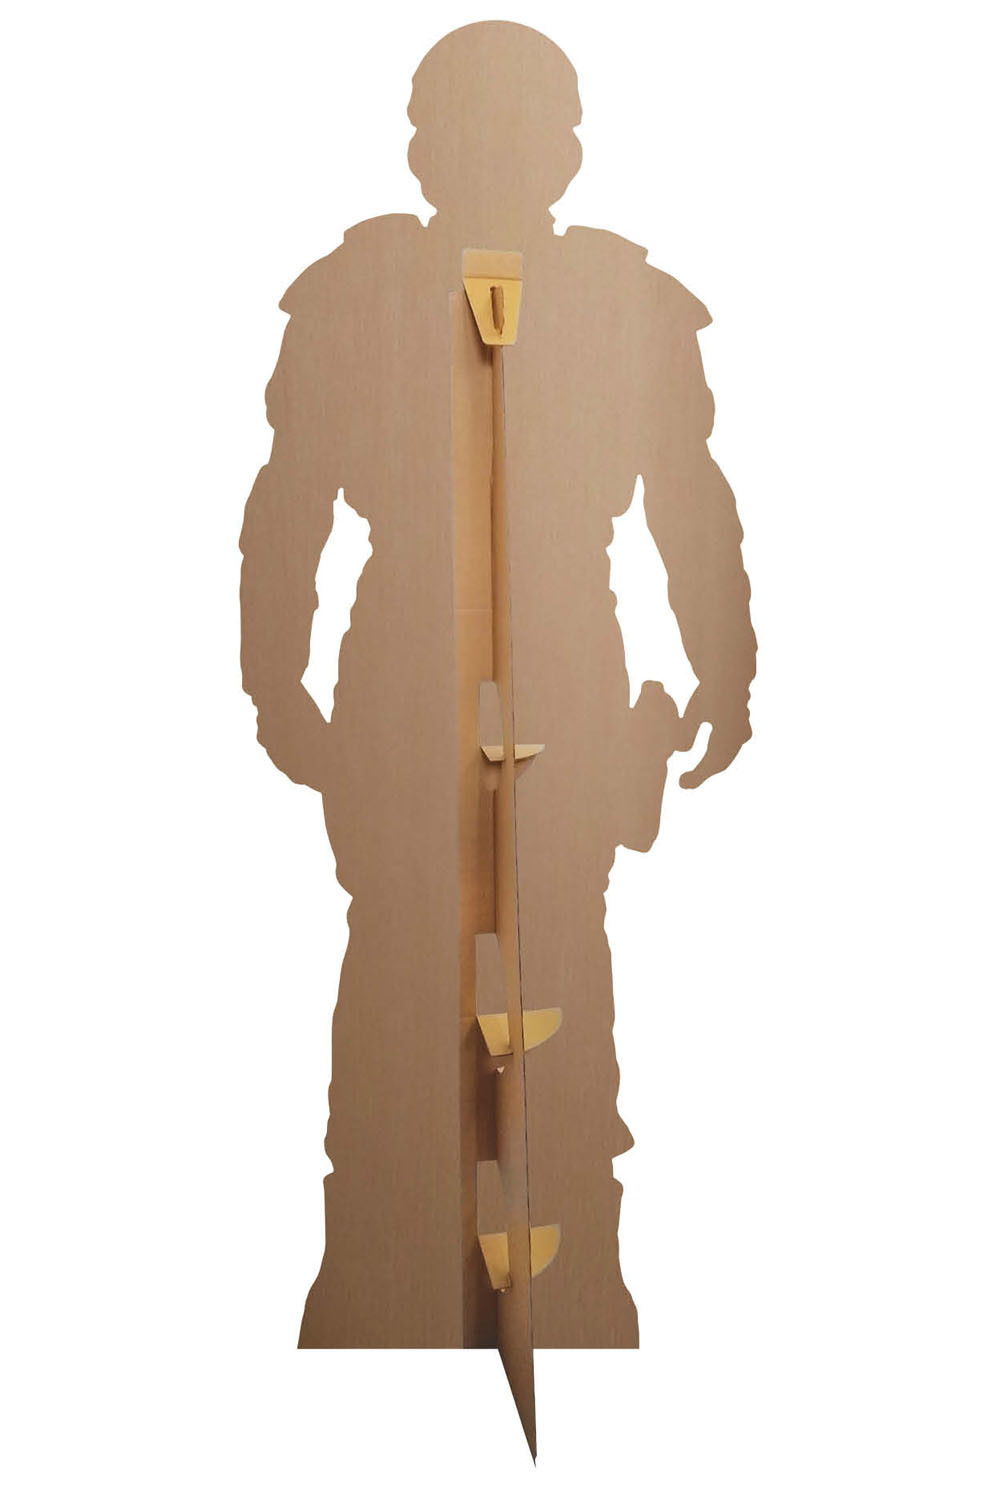 https://cdn11.bigcommerce.com/s-ydriczk/images/stencil/1500x1500/products/90382/99073/Rear-of-Doctor-Who-UNIT-soldier-Official-Lifesize-Cardboard-Cutout-buy-now-at-starstills__01090.1704278262.jpg?c=2&imbypass=on